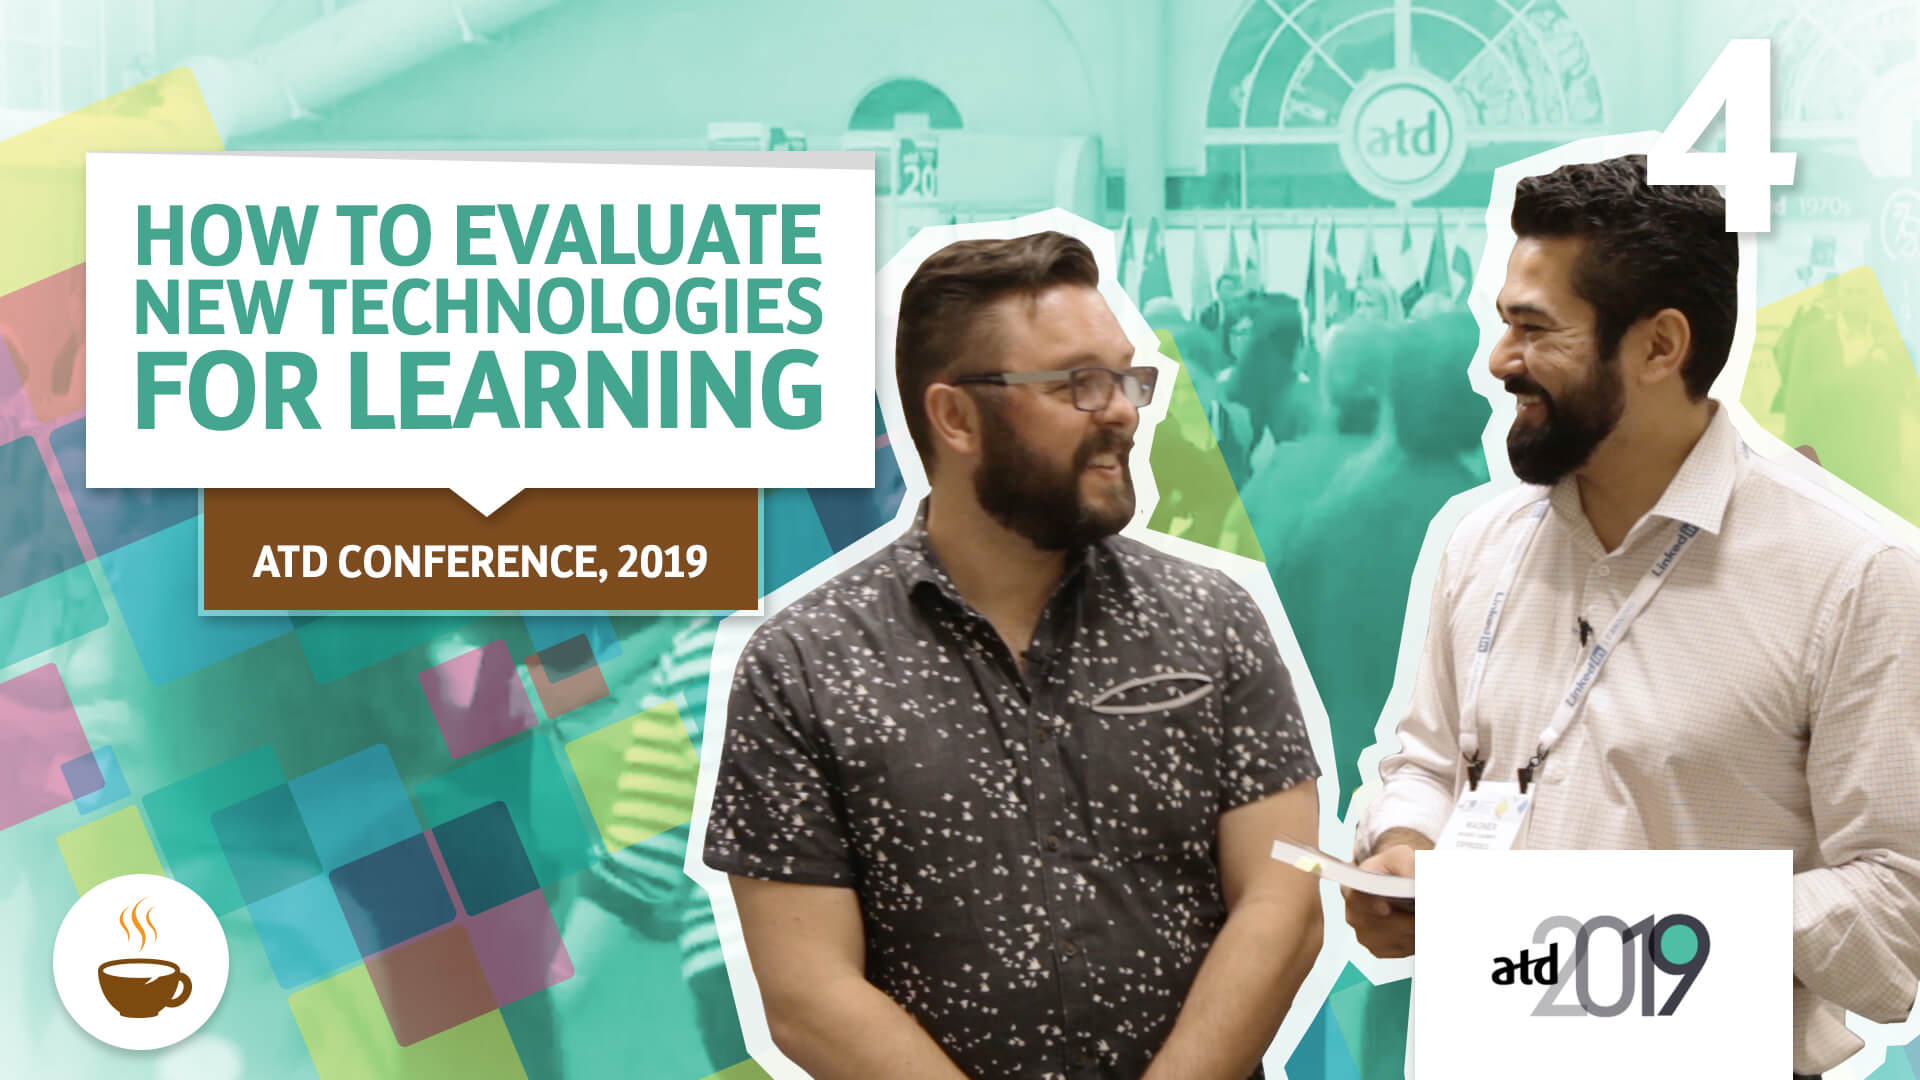 Wagner Cassimiro interviews Chad Udell about How to evaluate new technologies for learning – ATD Conference, 2019